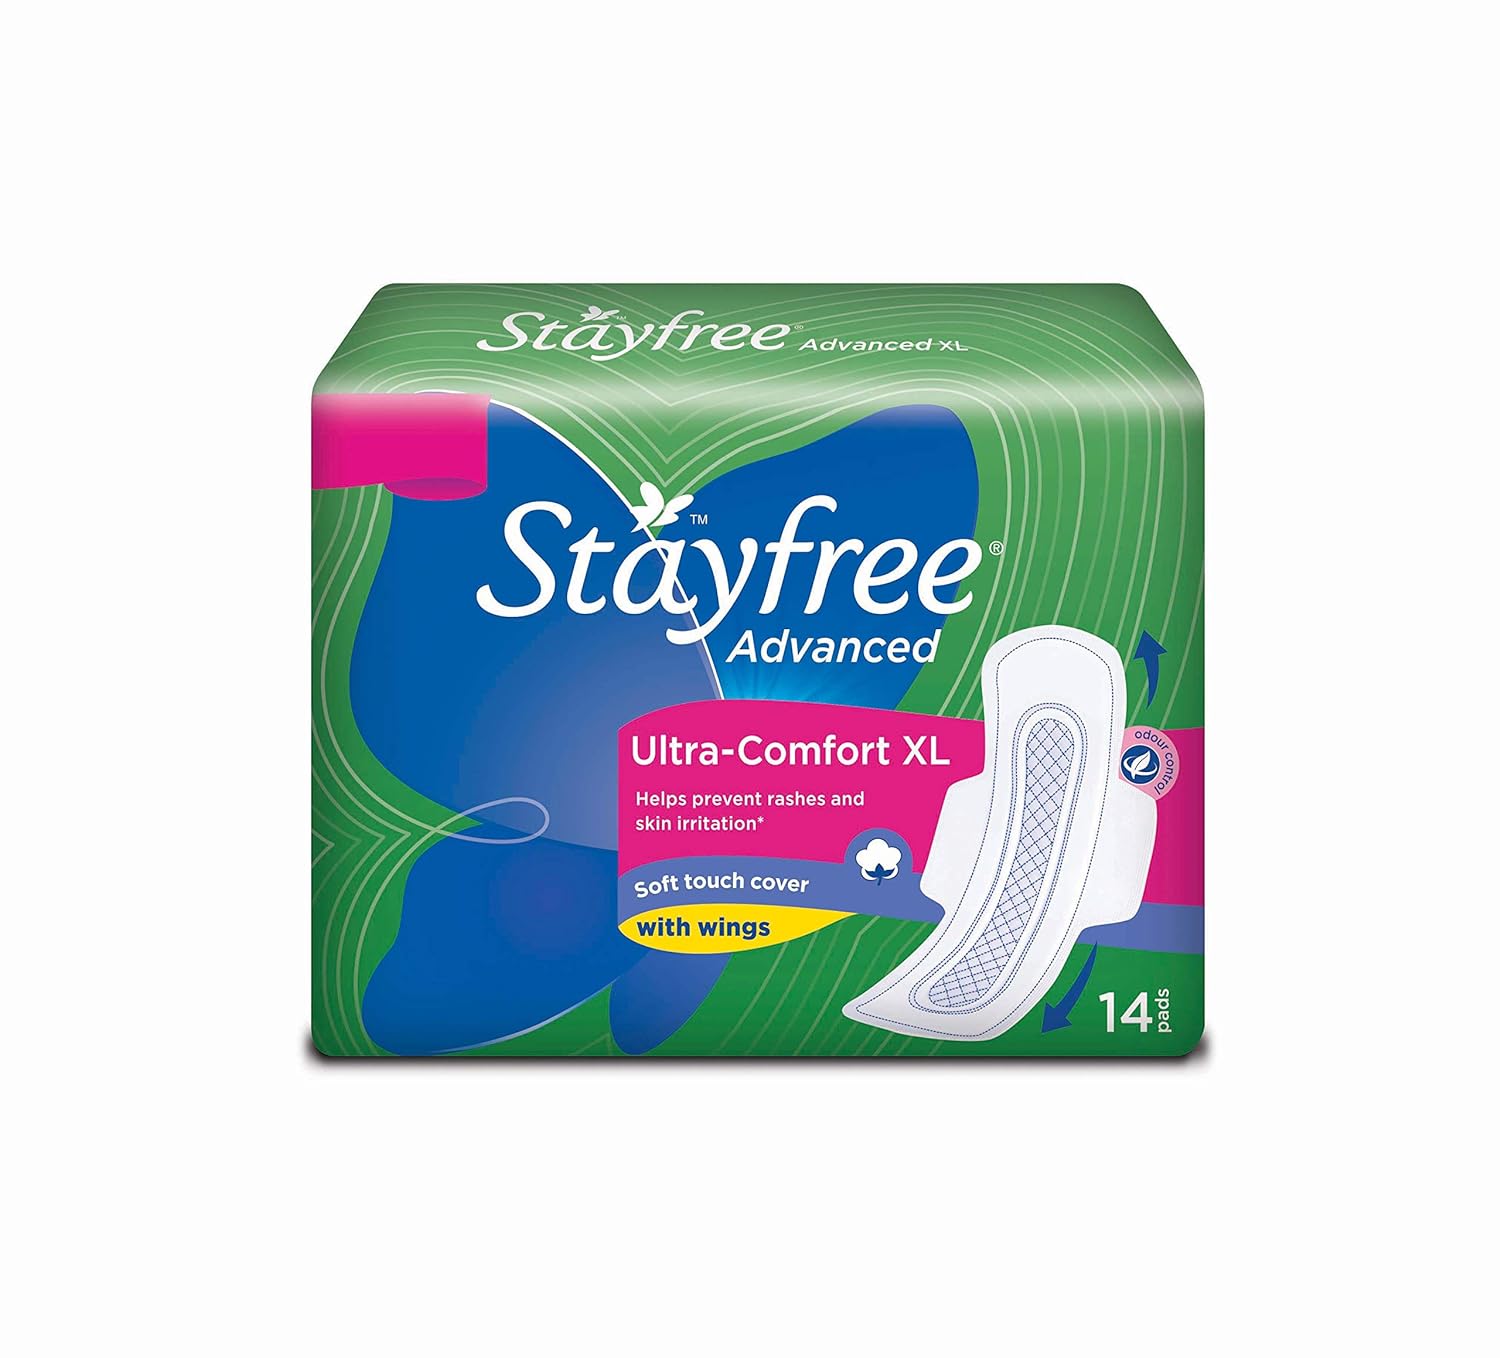 Stayfree Advanced XL Ultra Comfort Sanitary napkins with Wings (14 Count)